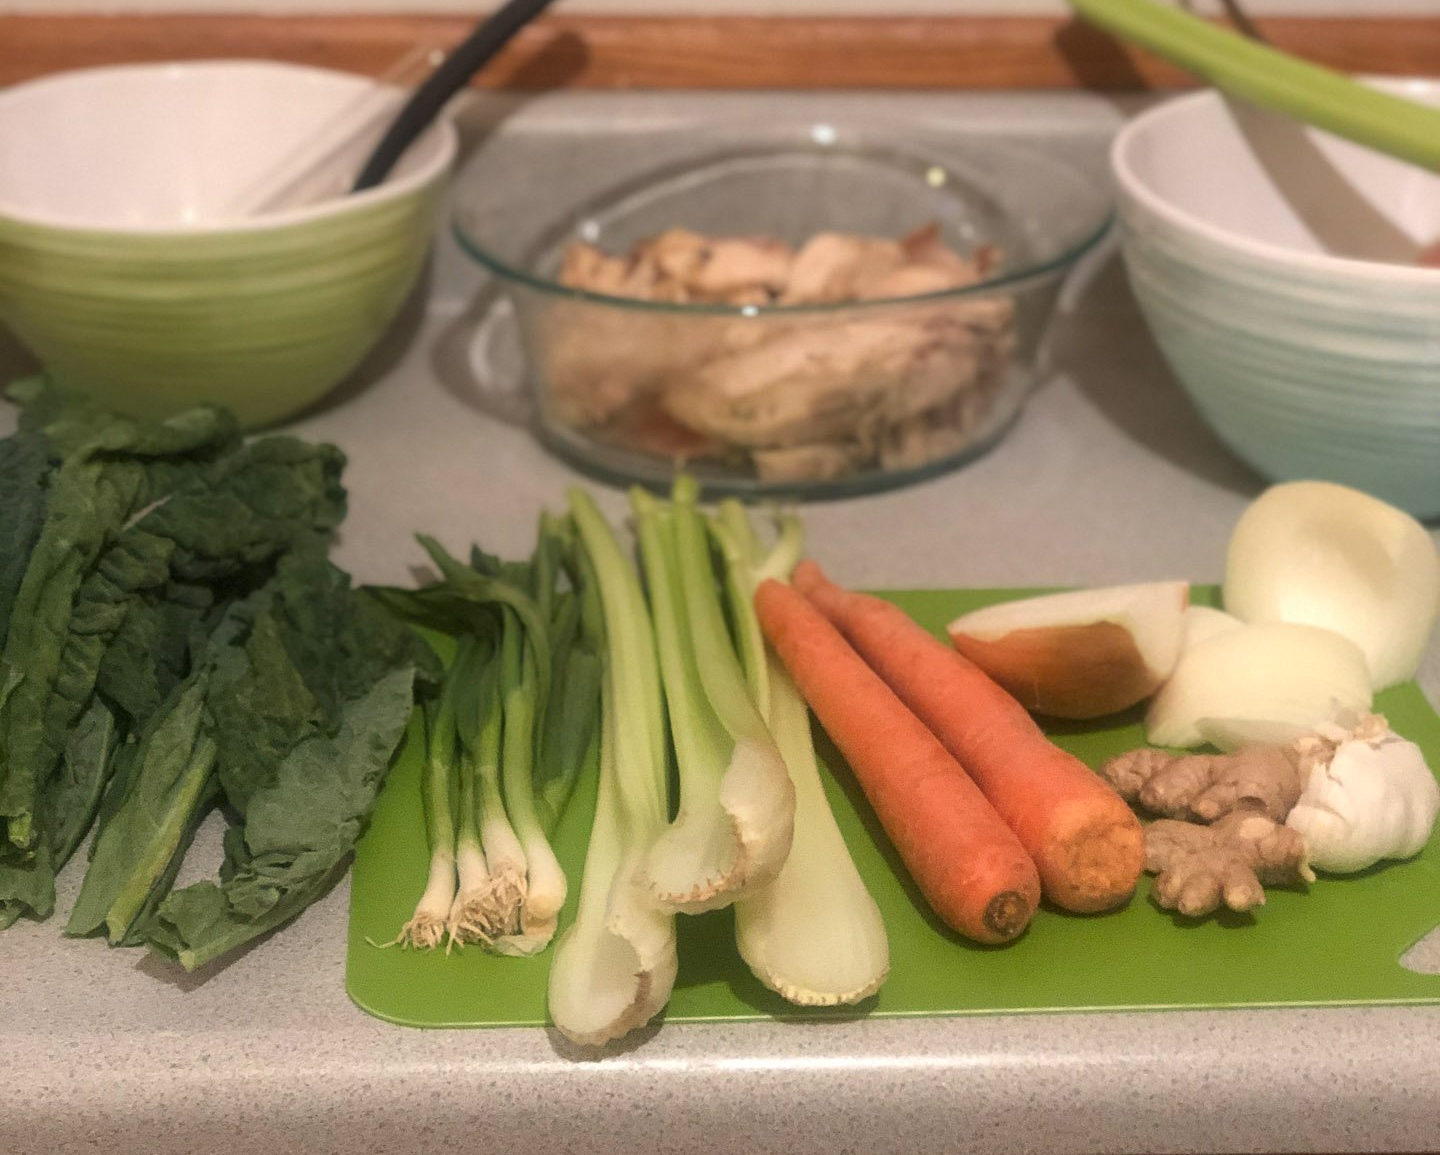 Food can be medicine, carrots, celery, onions, garlic, ginger, and kale